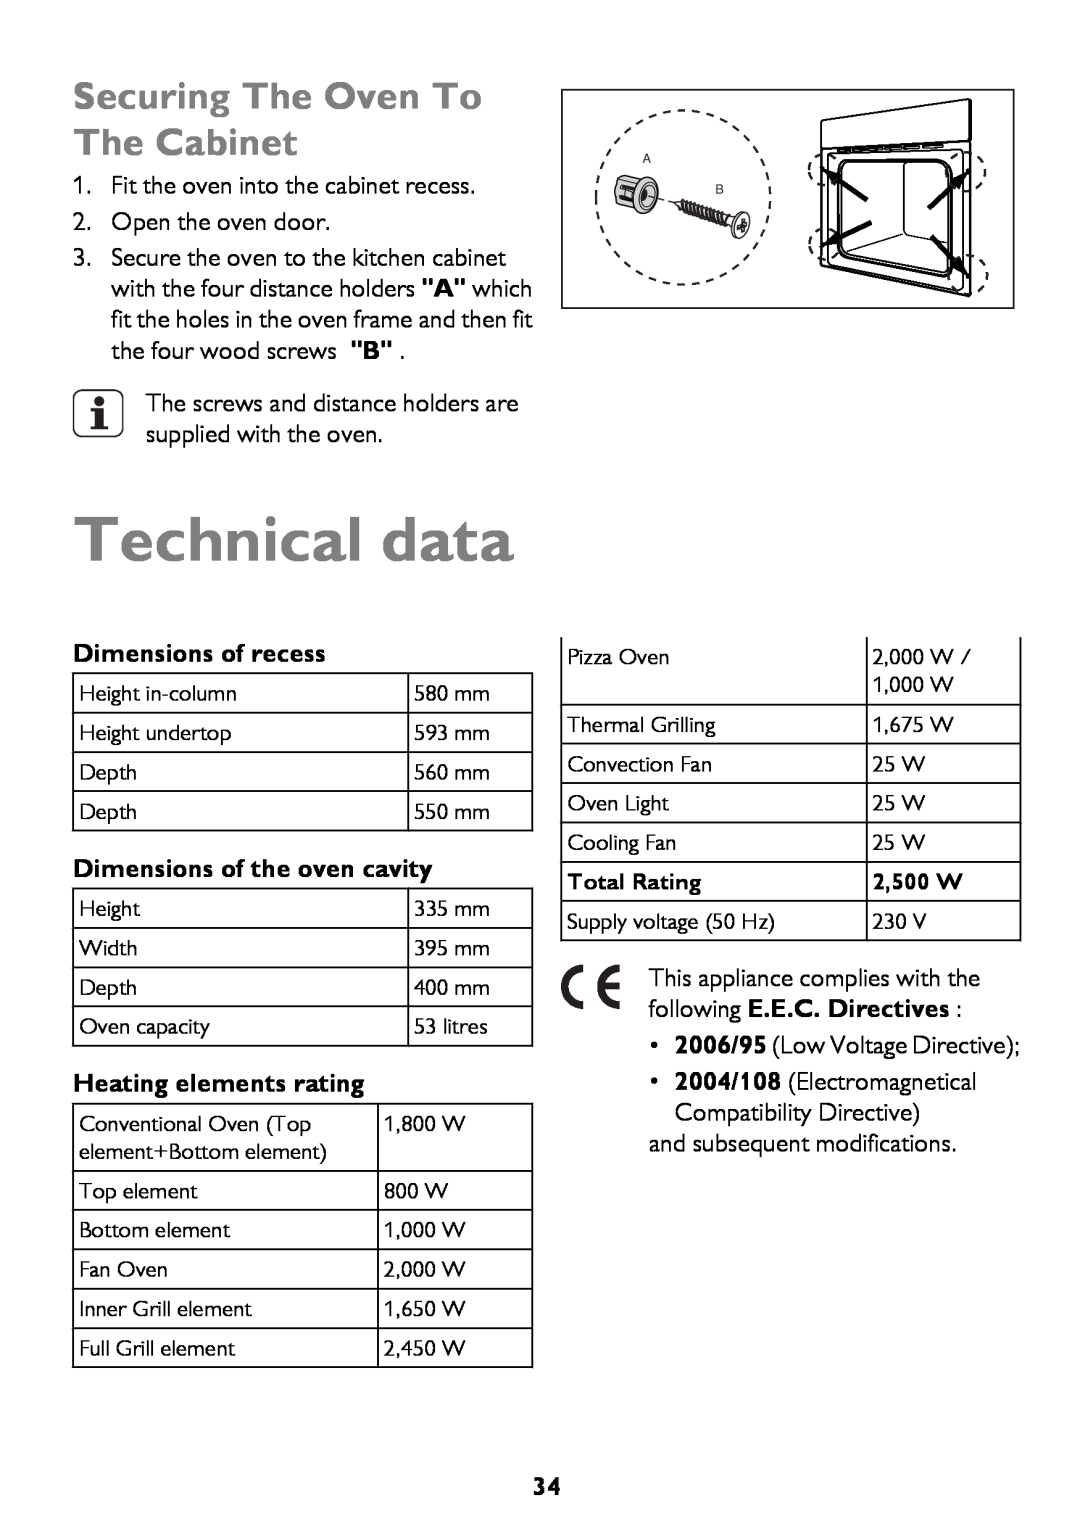 John Lewis JLBIOS662 Technical data, Securing The Oven To The Cabinet, Dimensions of recess, Dimensions of the oven cavity 